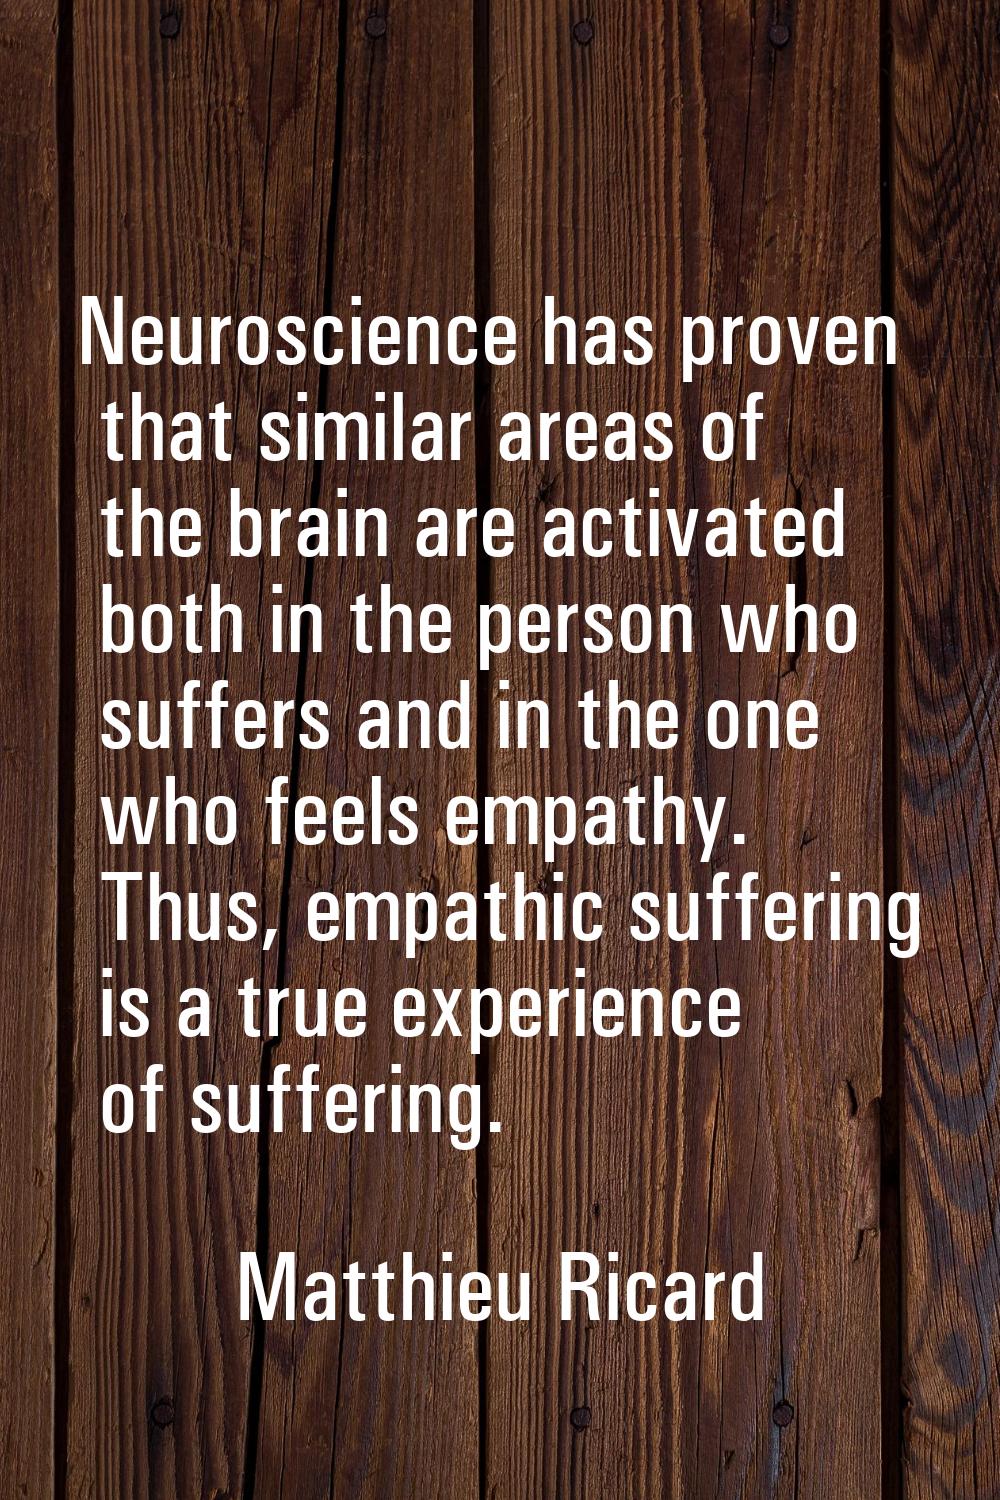 Neuroscience has proven that similar areas of the brain are activated both in the person who suffer